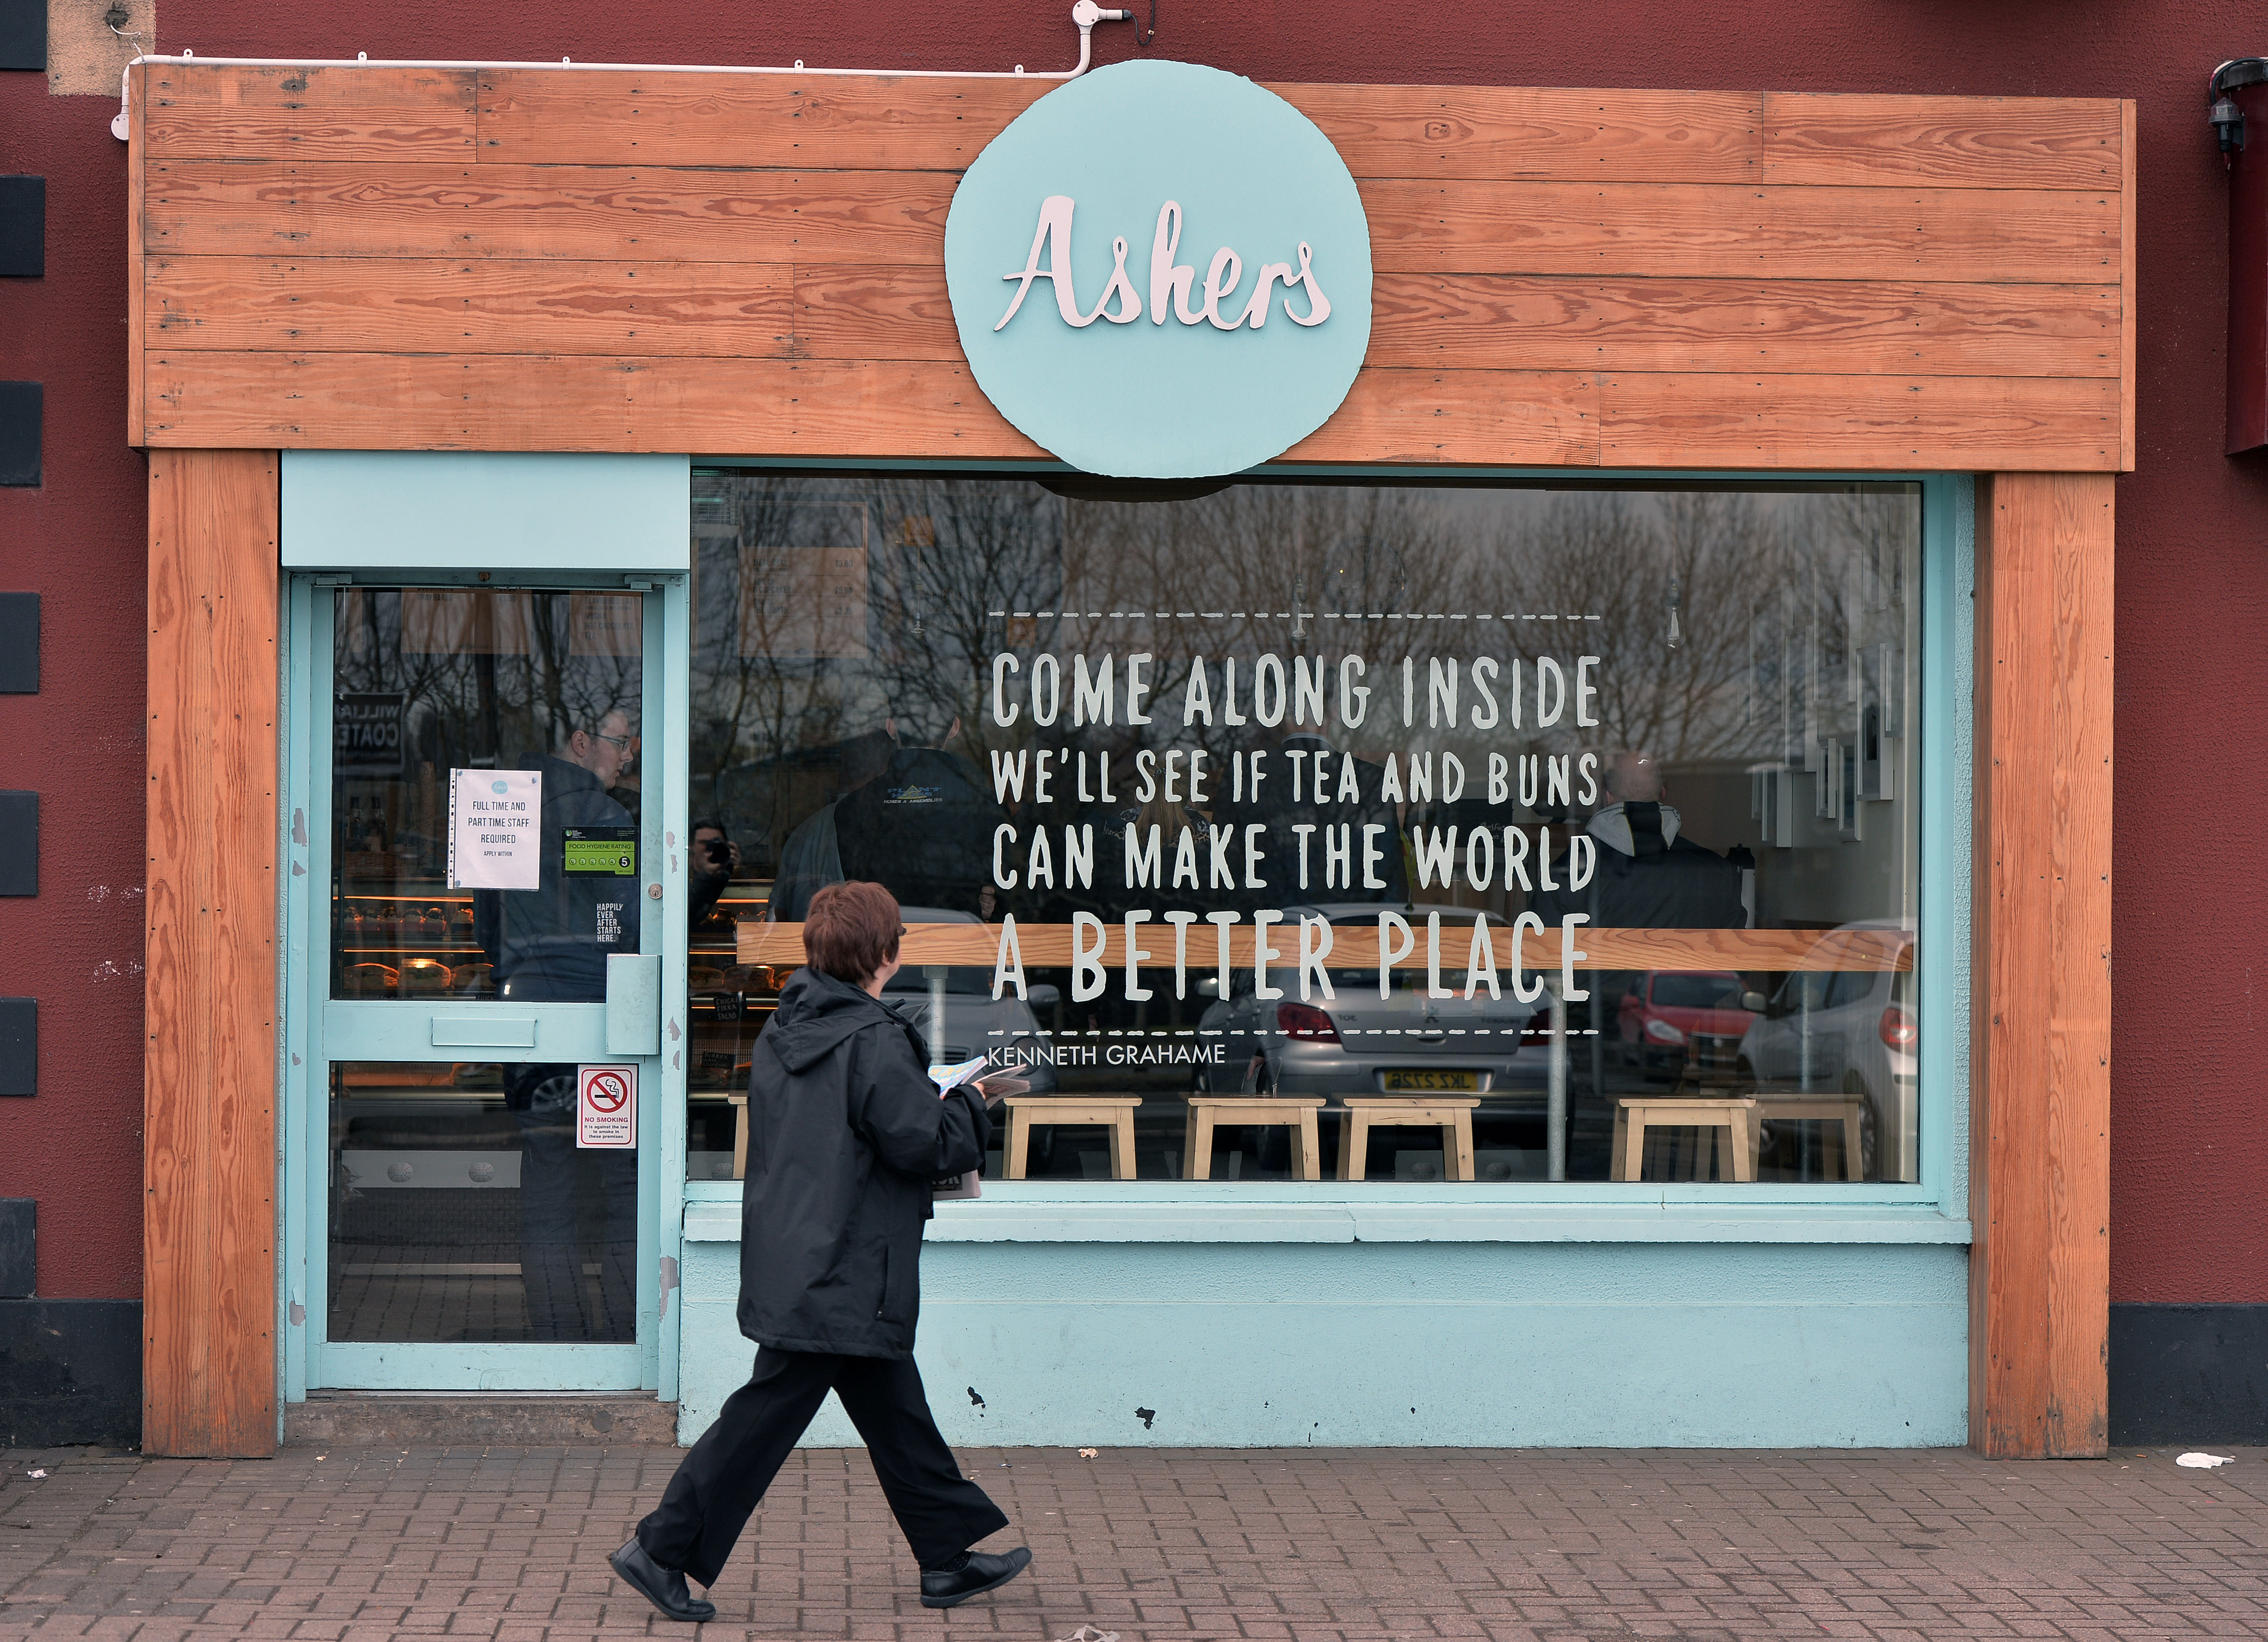 Ashers, a Christian-run bakery triggered a discrimination row when it refused to bake a cake for an anti-homophobic event in May, 2014. (Charles McQuillan—Getty Images)